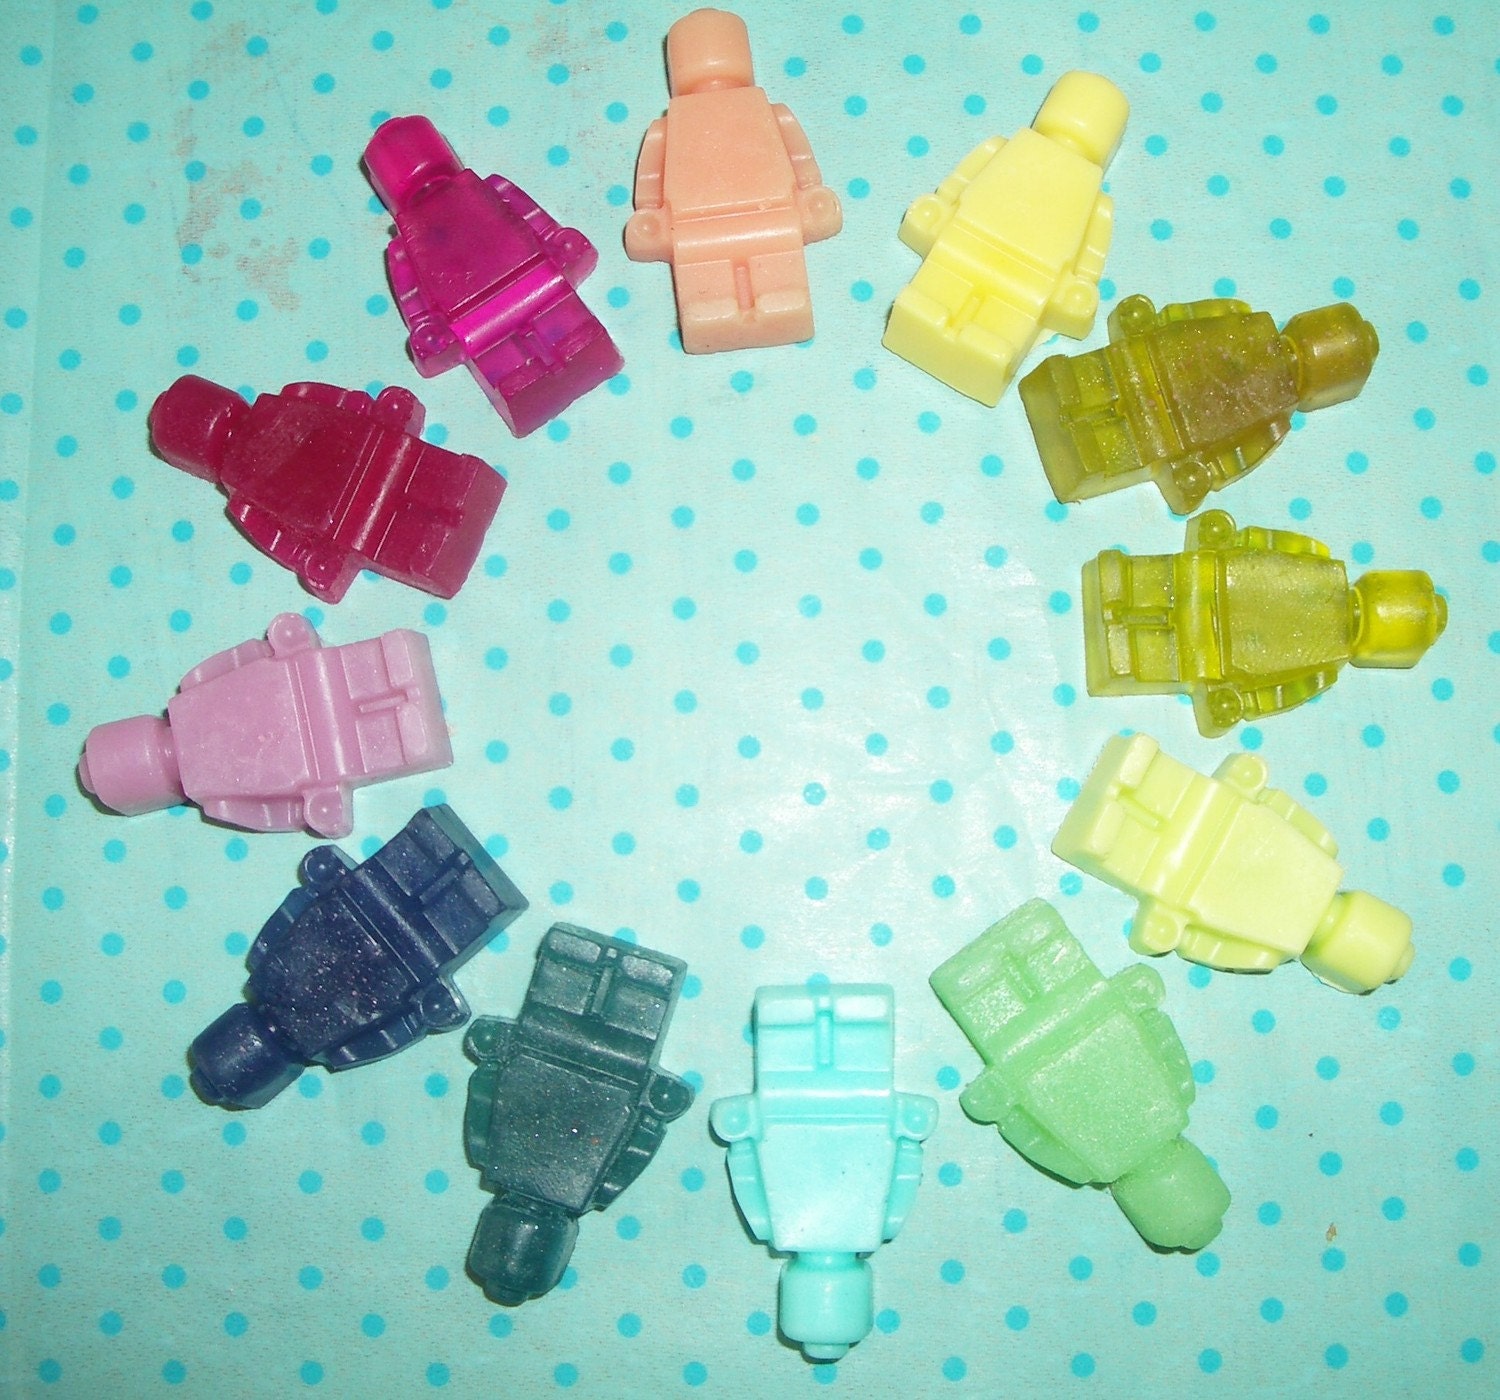 Brickman Mini Soaps Set of 12. - Pick Your Colors and Scents